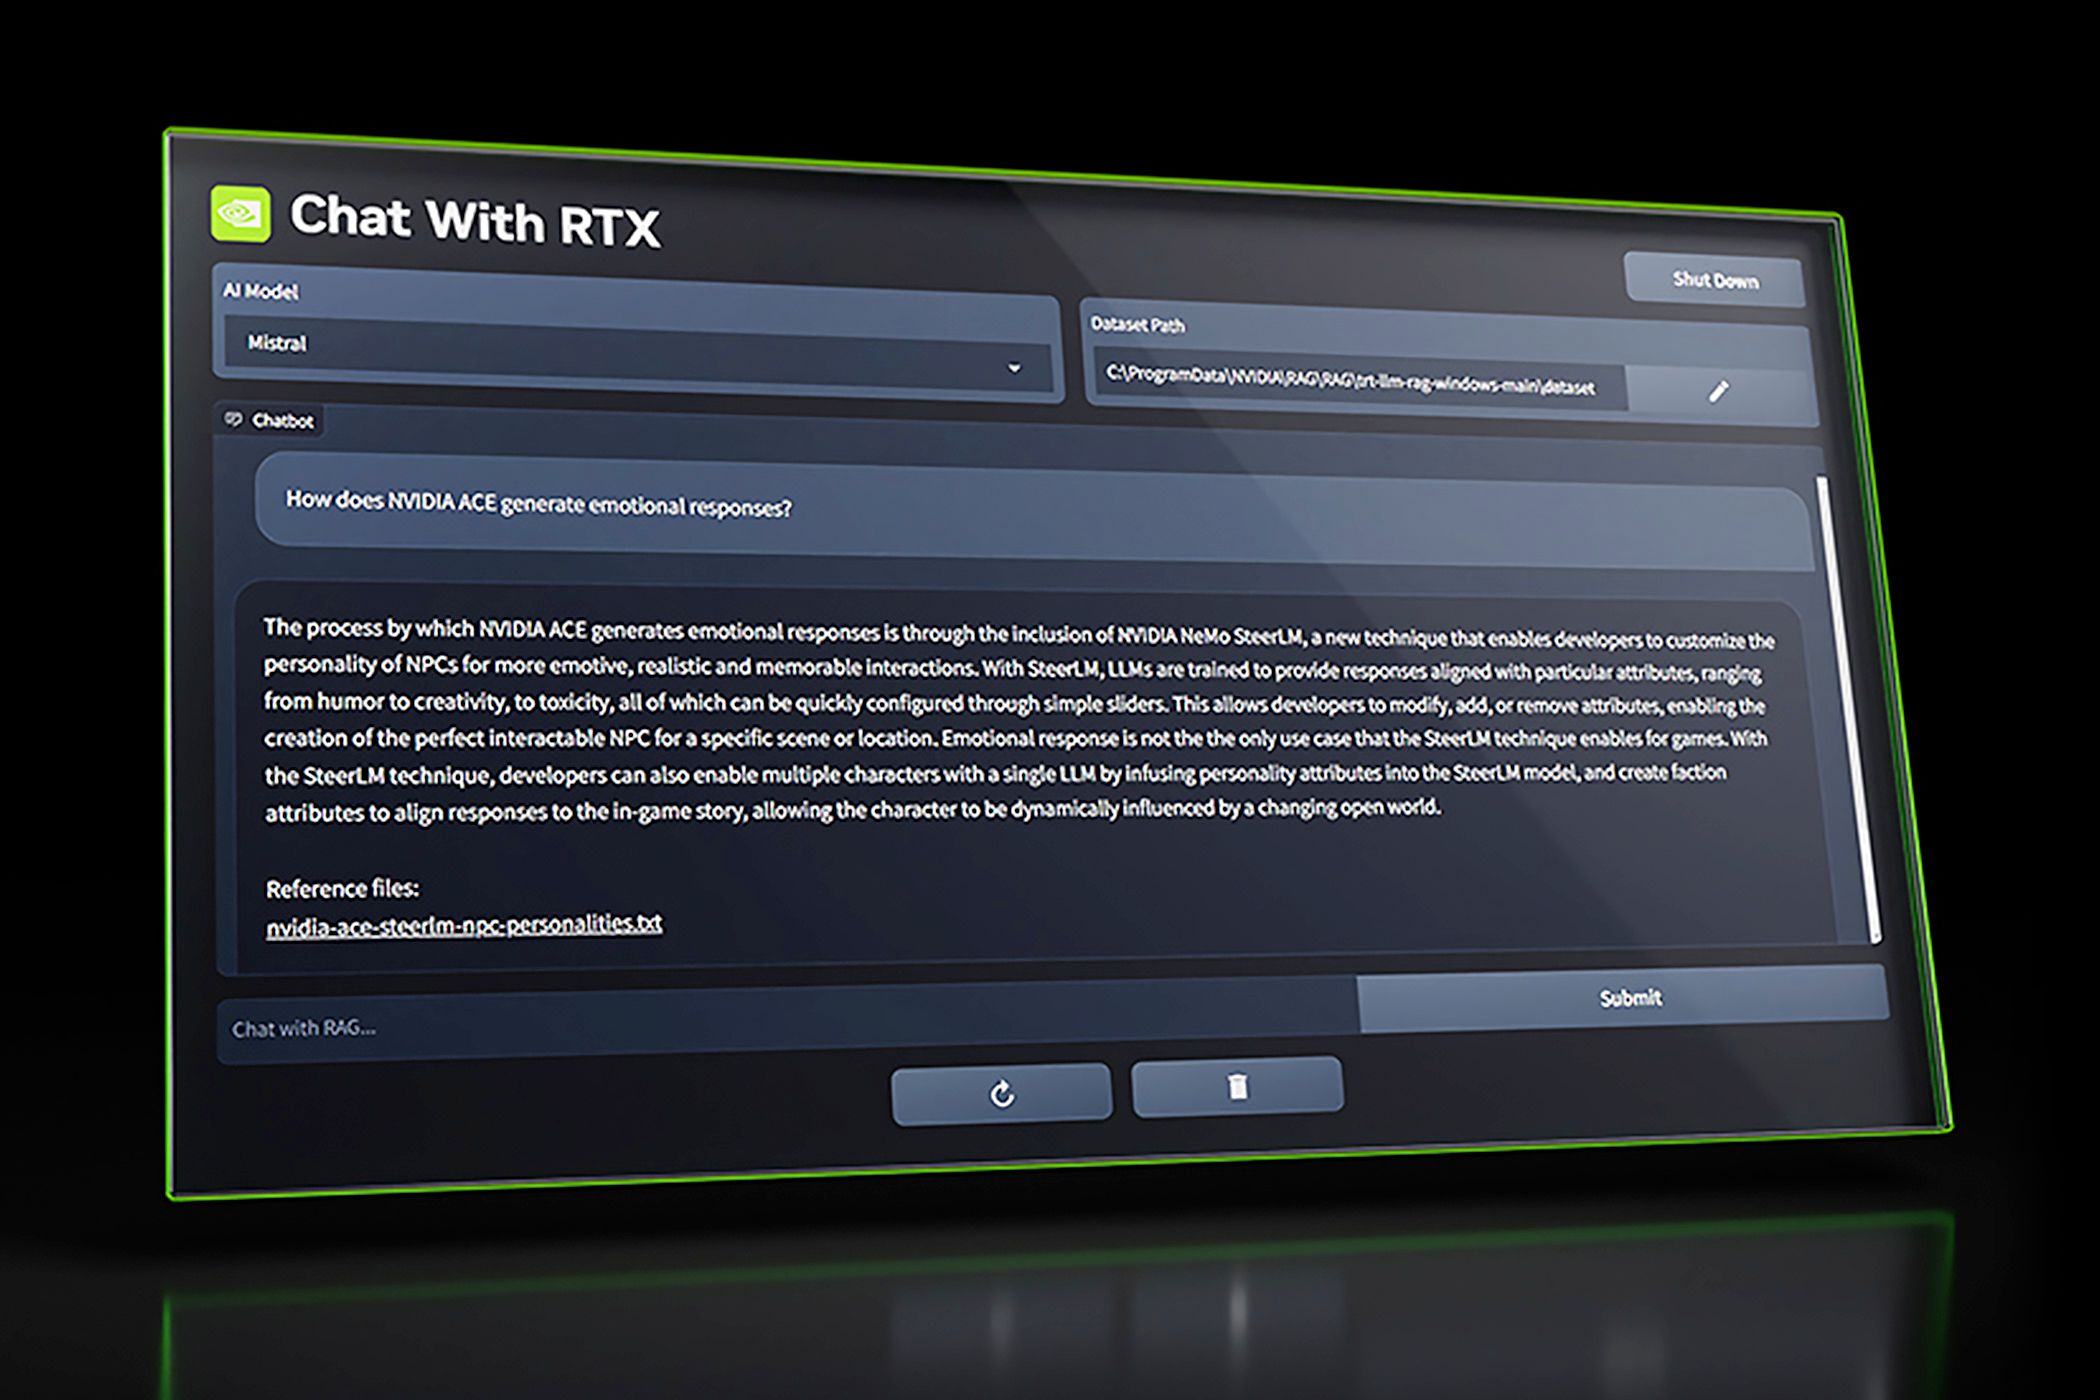 An illustration of the NVIDIA Chat with RTX interface.